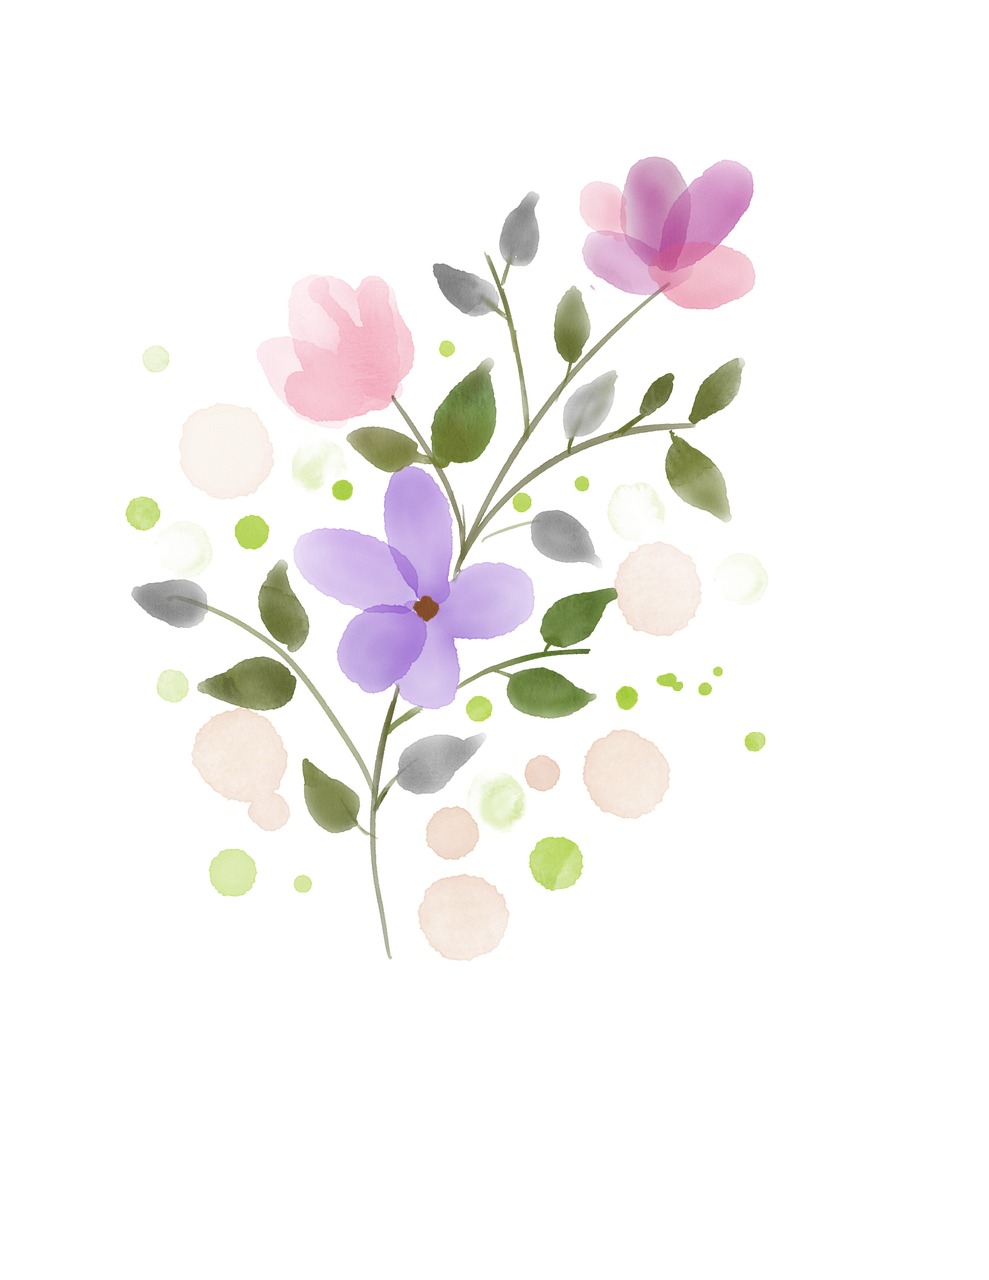 a bunch of flowers on a black background, a digital painting, inspired by François Boquet, naive art, seasons!! : 🌸 ☀ 🍂 ❄, colored dots, some purple and orange, leaves